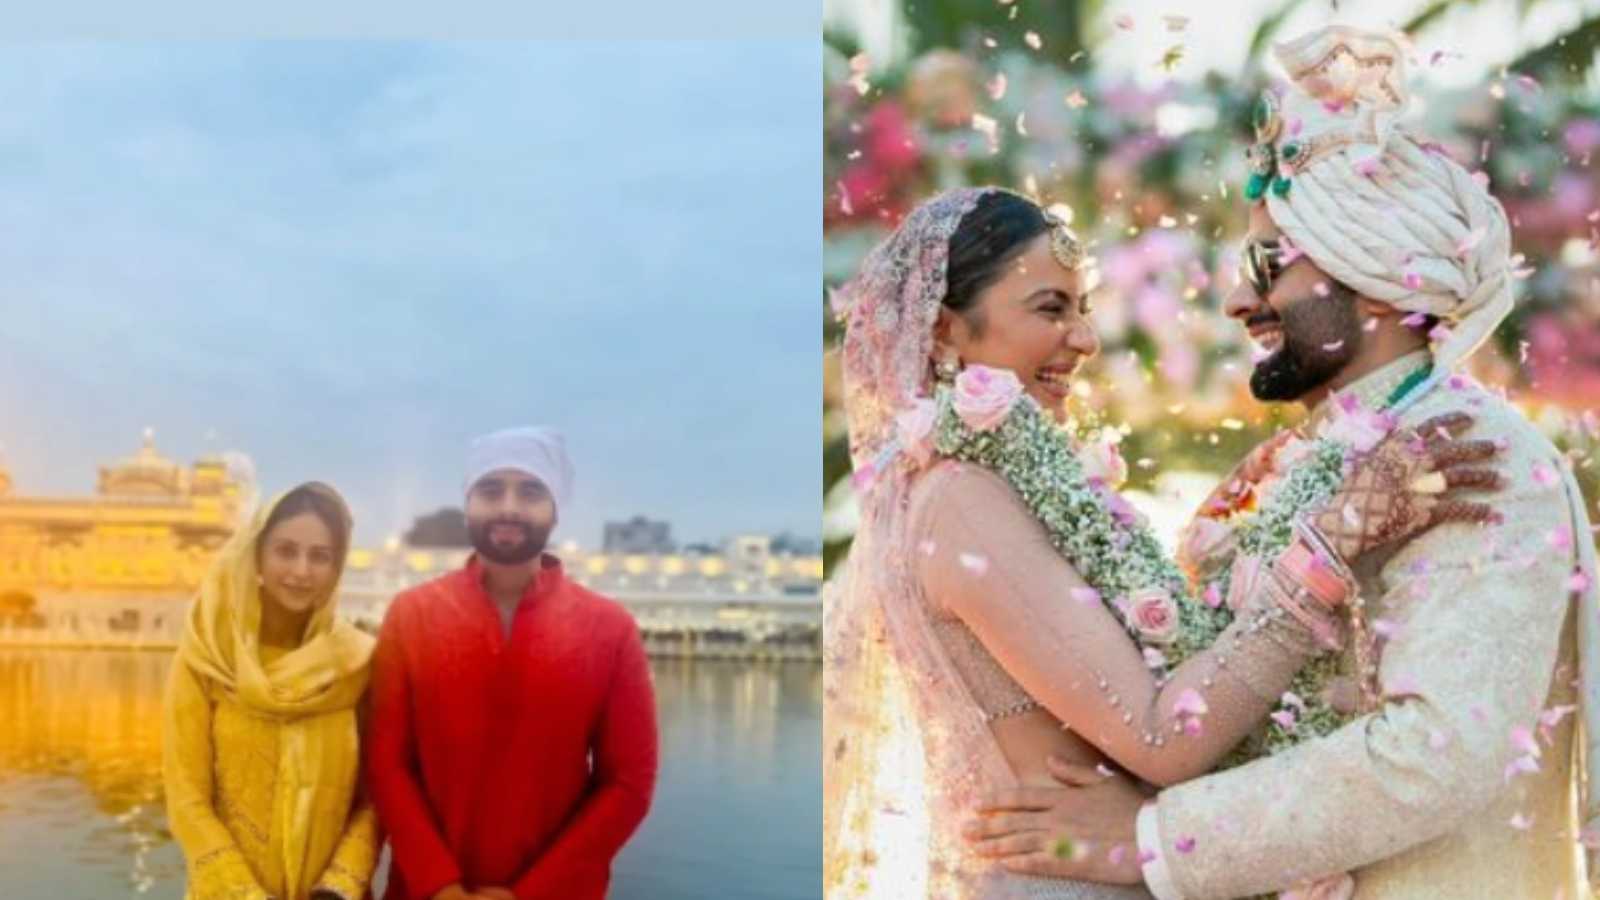 Newlyweds Rakul Preet Singh and Jackky Bhagnani seek blessings at the Golden Temple, see pics